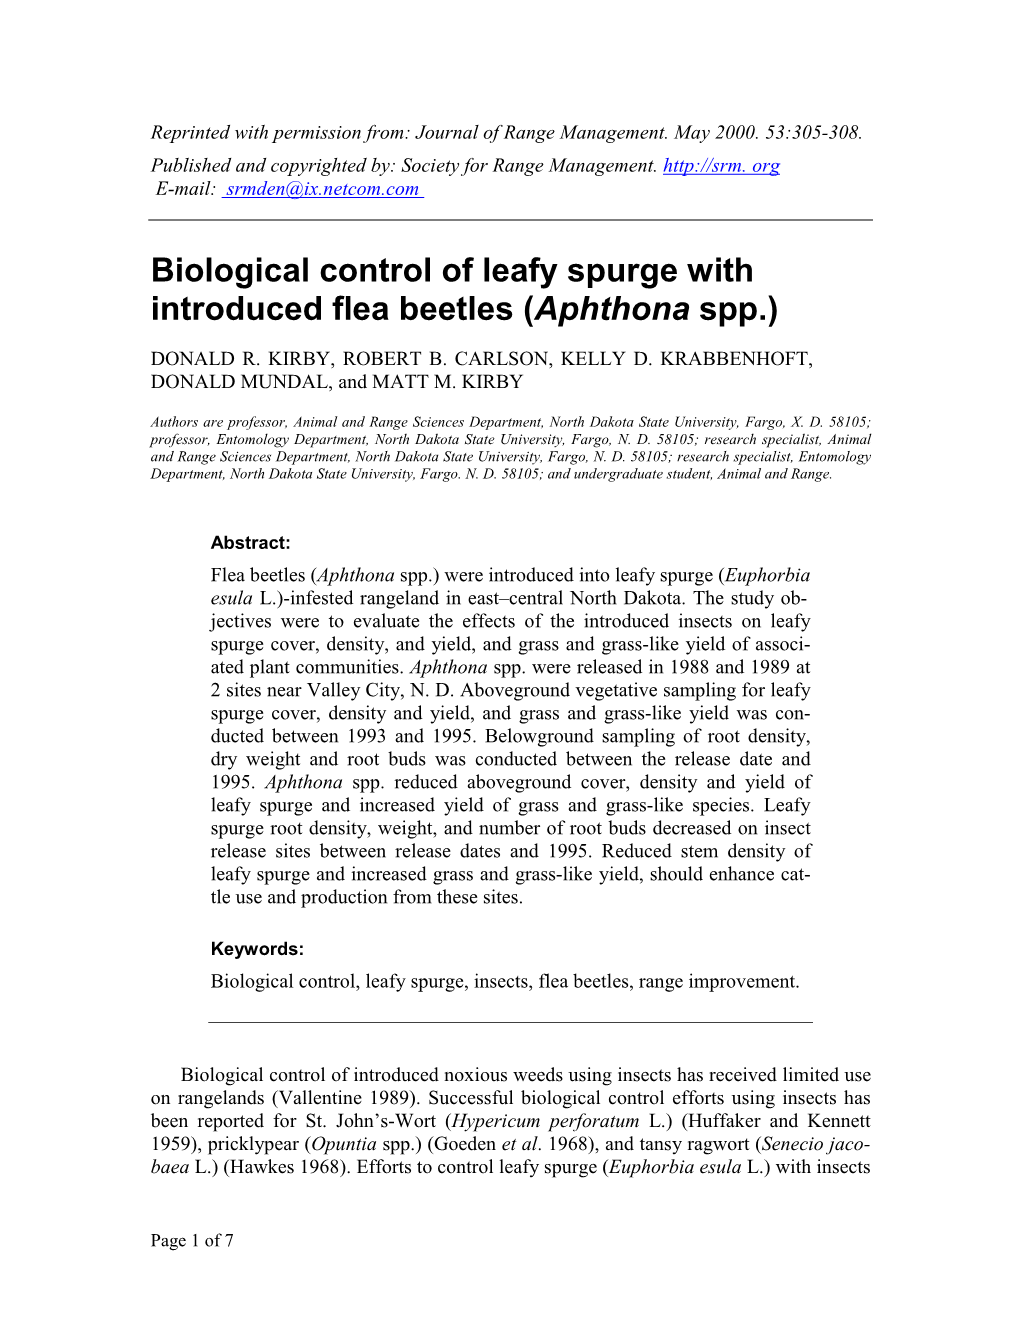 Biological Control of Leafy Spurge with Introduced Flea Beetles (Aphthona Spp.) DONALD R